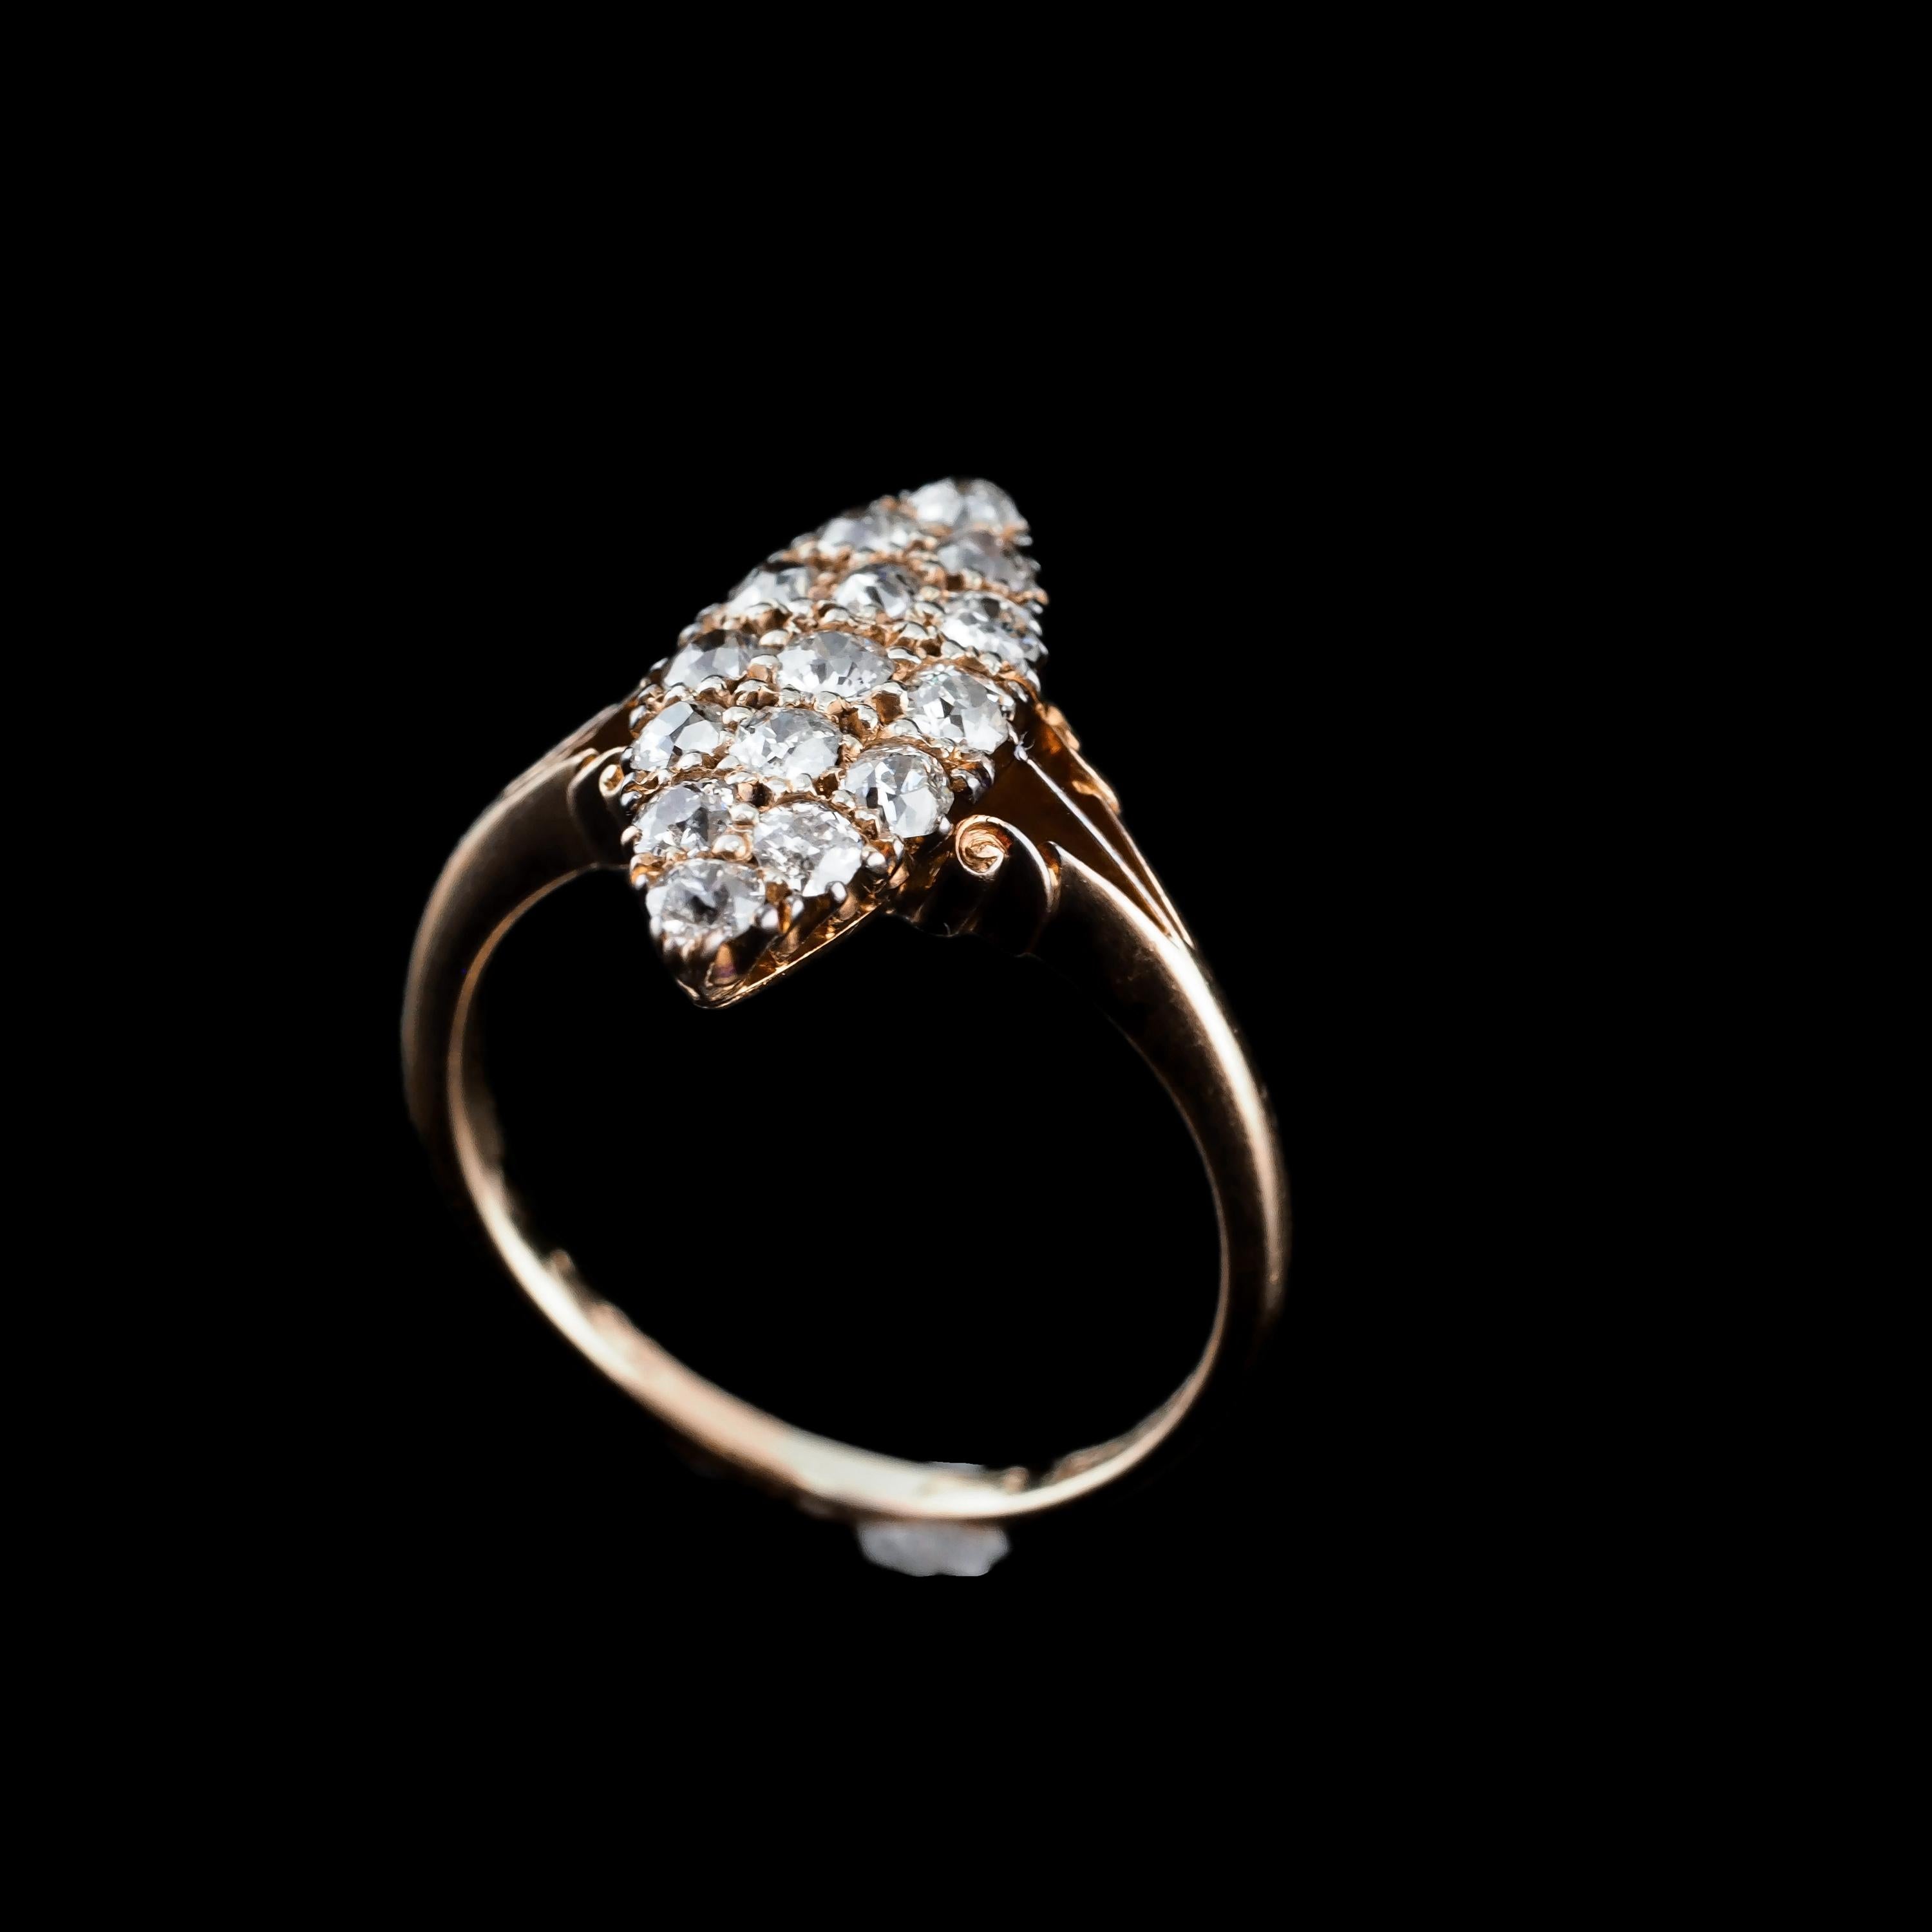 Antique Diamond Ring 18K Gold Navette/Cluster Design - c.1900s In Good Condition For Sale In London, GB